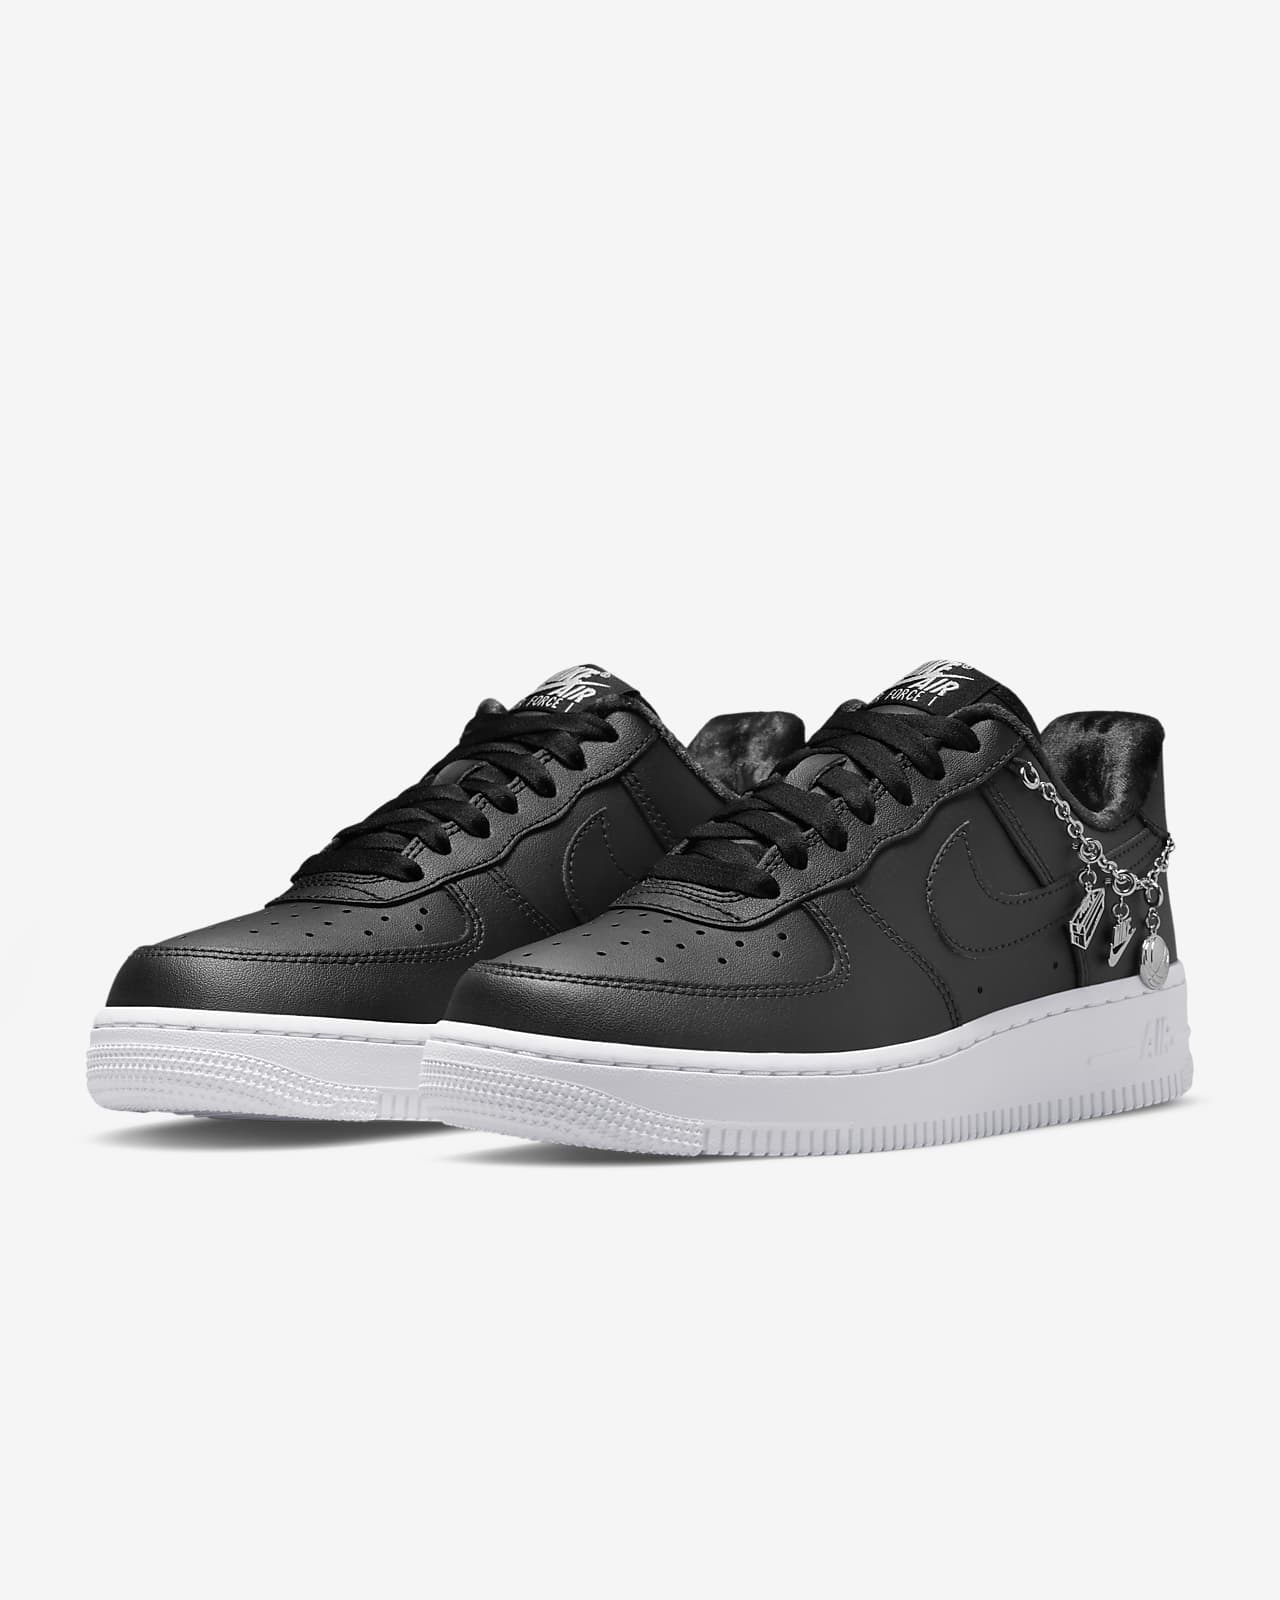 air force 1 donna nere alte